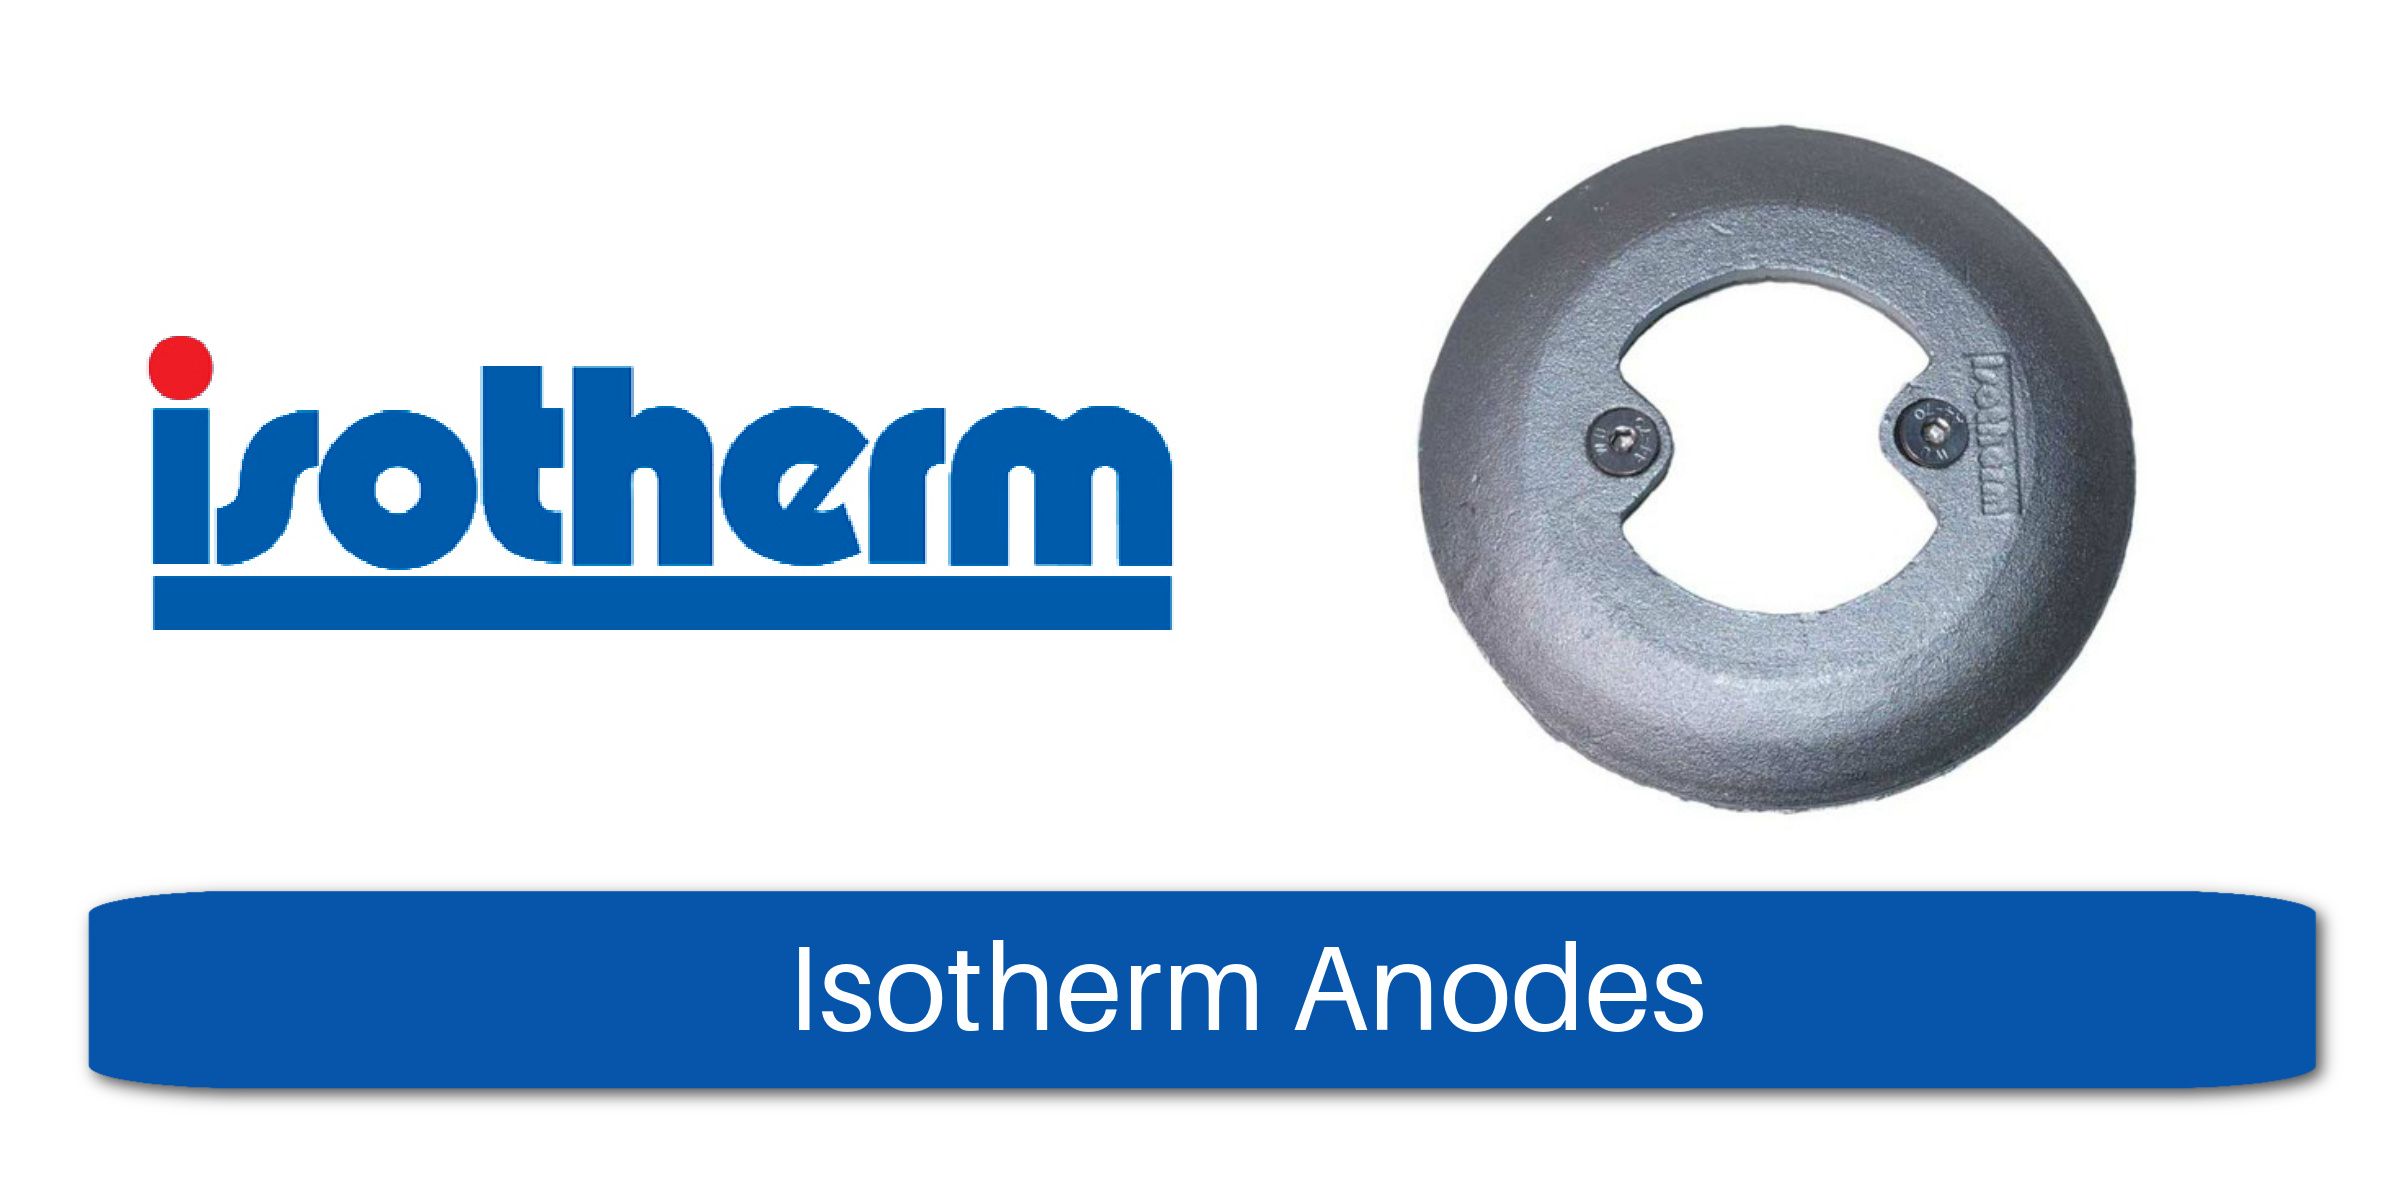 Isotherm Anodes